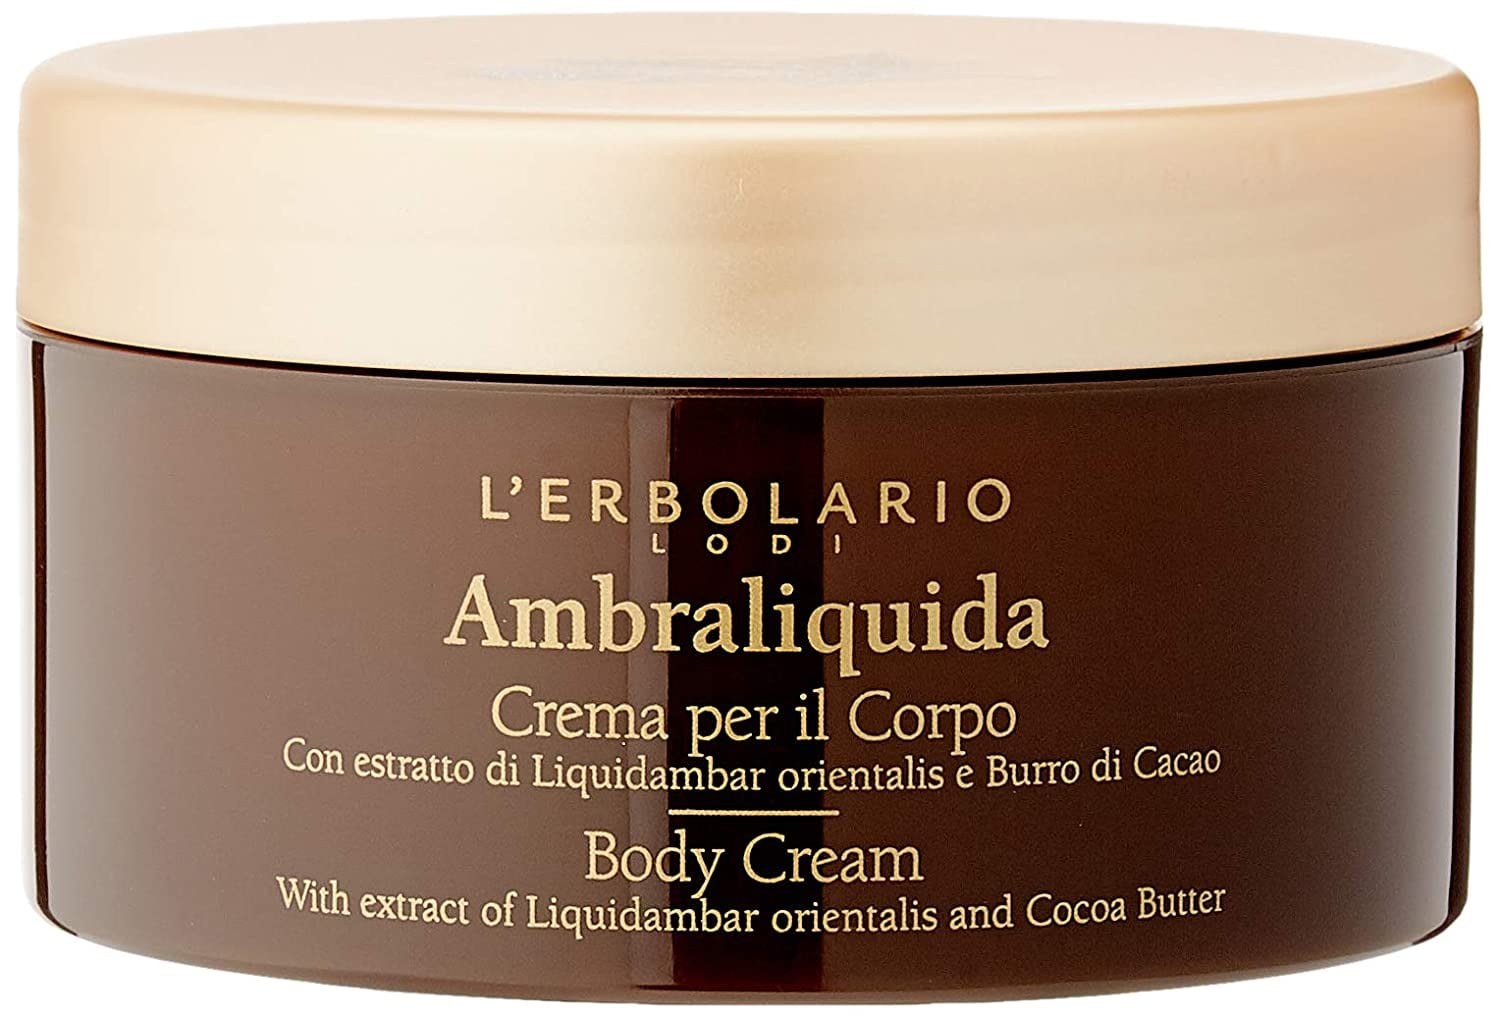 A Nourishing Body Cream: L'Erbolario Ambraliquida Body Cream, Shop the  Best Products From 's Made in Italy Store